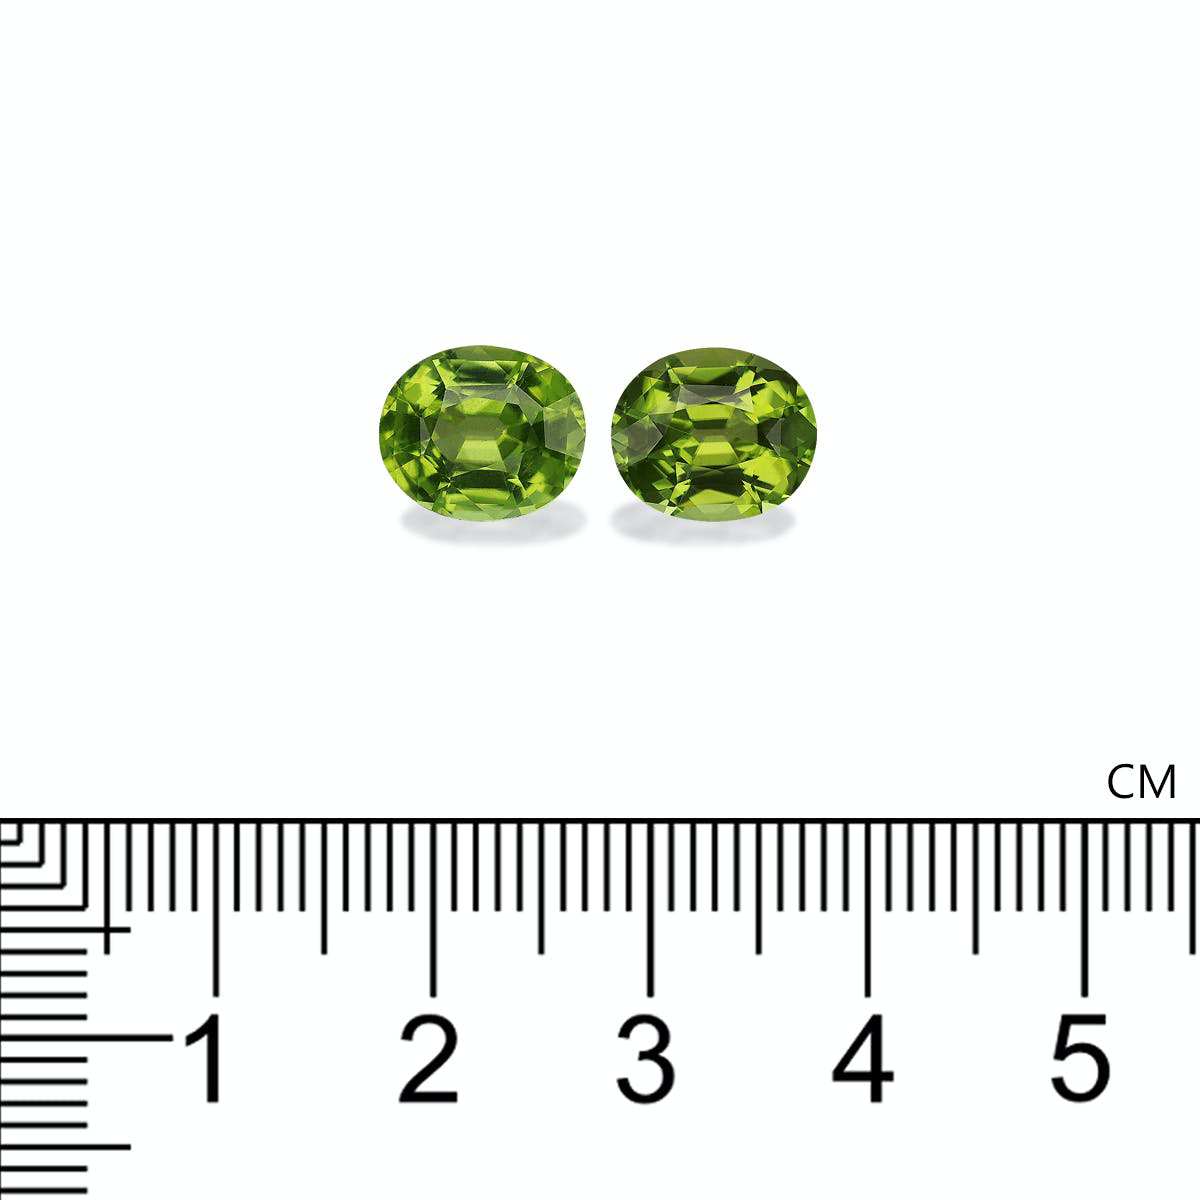 Picture of Green Peridot 5.24ct - Pair (PD0150)